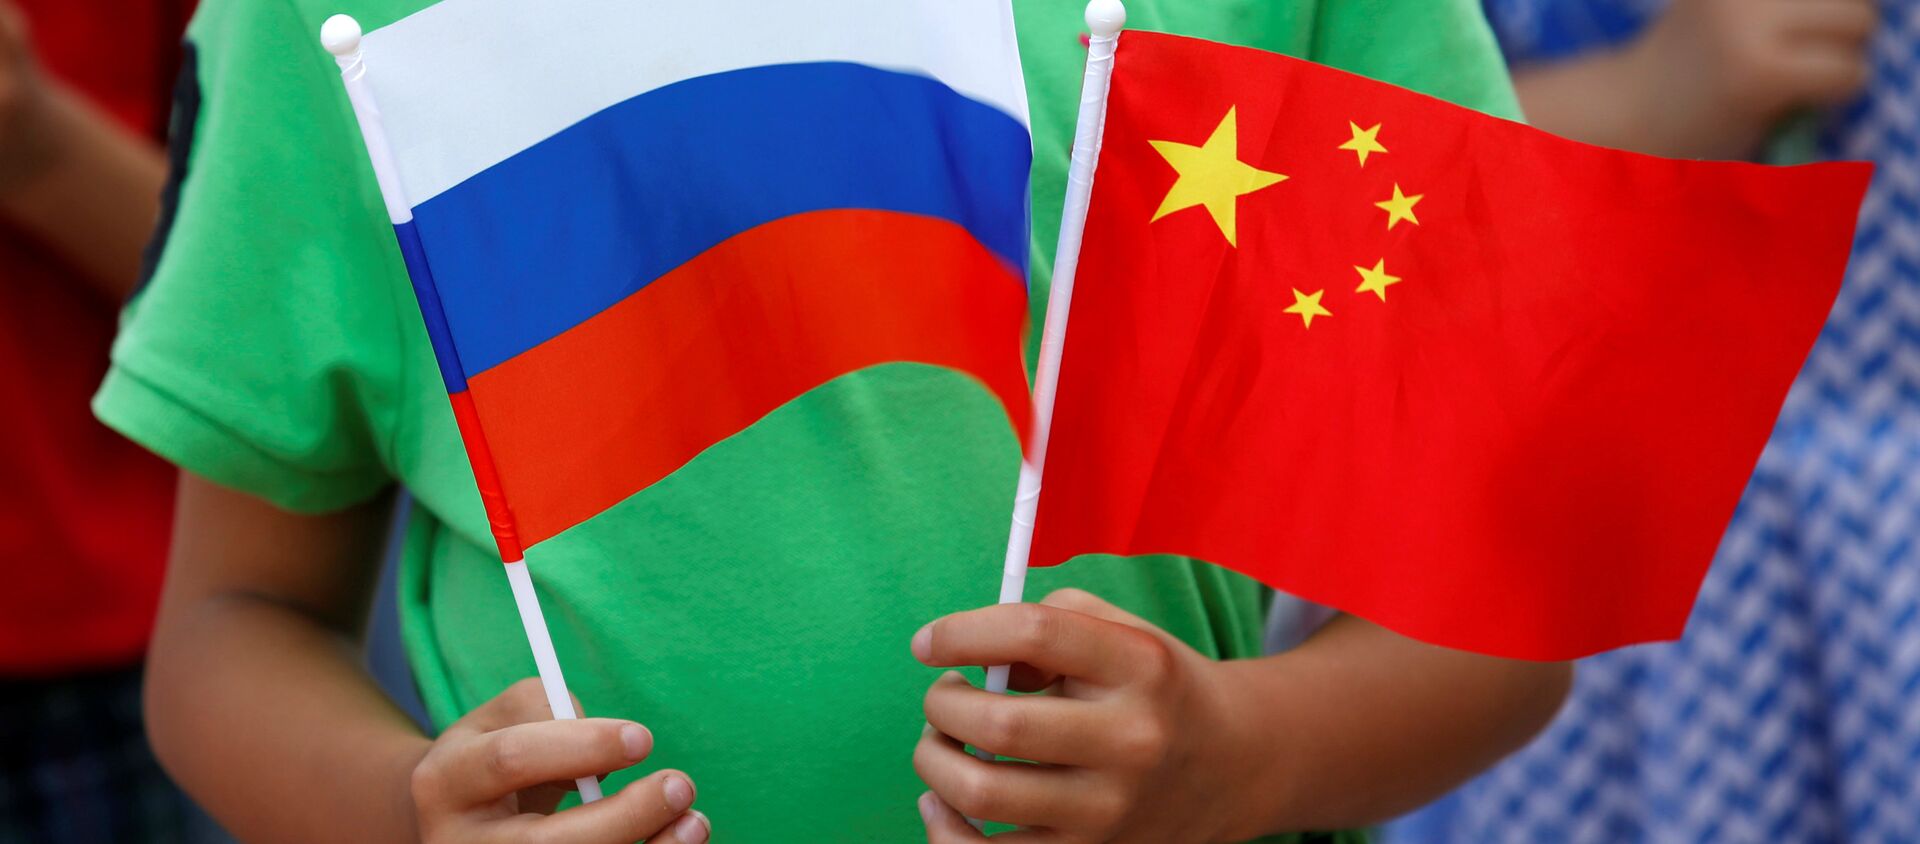 A child holds the national flags of Russia and China prior to a welcoming ceremony for Russian President Vladimir Putin outside the Great Hall of the People in Beijing, China, June 25, 2016 - Sputnik International, 1920, 11.09.2018